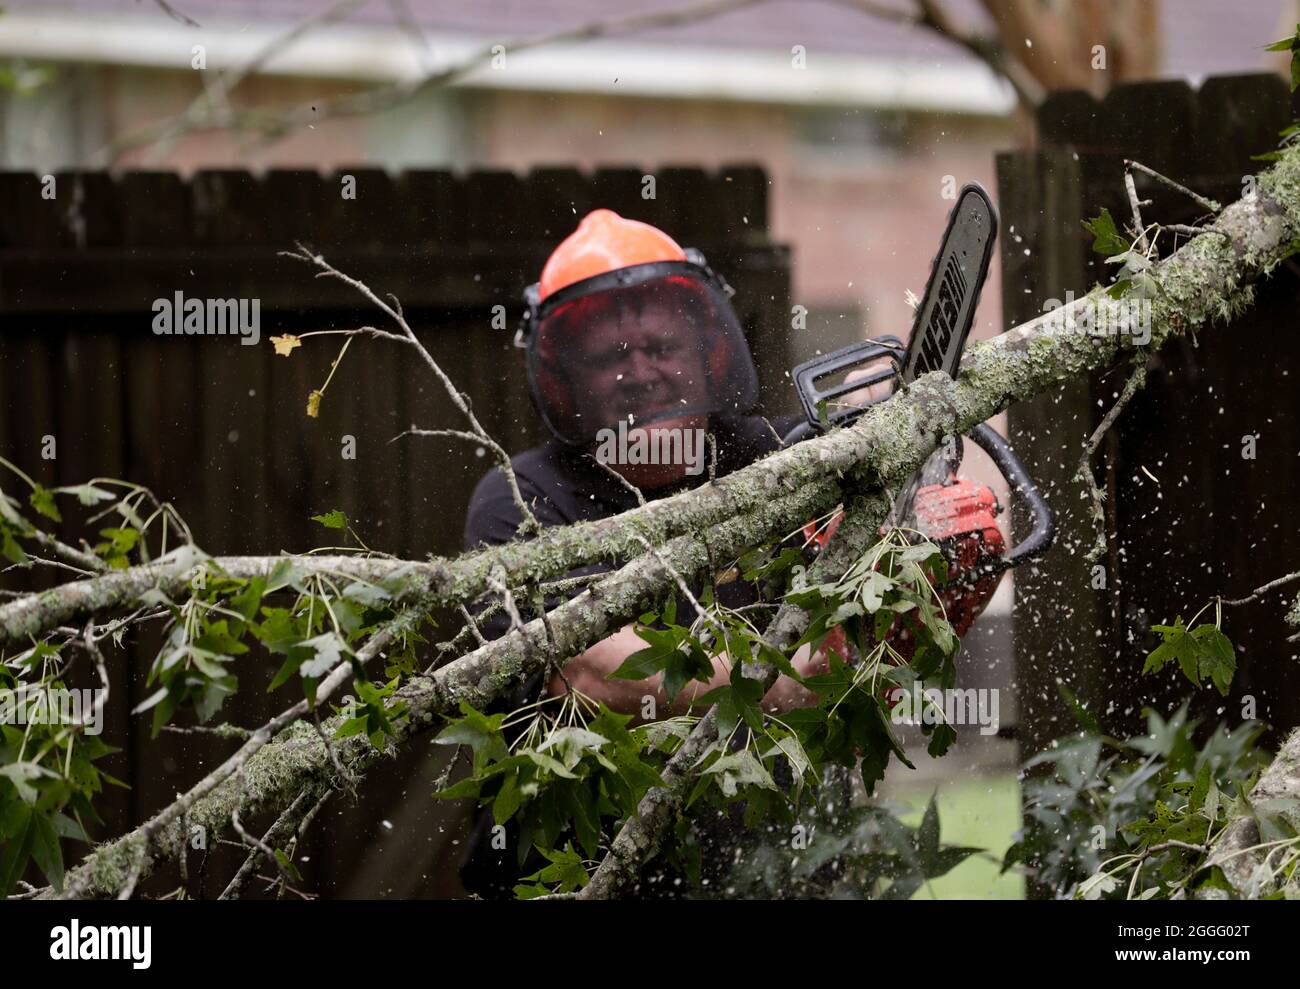 Baton Rouge, United States of America. 30 August, 2021. U.S. Border Patrol agents from the Lake Charles Border Patrol Station help clear downed trees from a residence in the aftermath of Hurricane Ida August 30, 2021 in Baton Rouge, Louisiana. Ida swept through the area with winds of 150 mph and made landfall 16-years ago to the day of Hurricane Katrina. Credit: Glenn Fawcett/CBP Photo/Alamy Live News Stock Photo